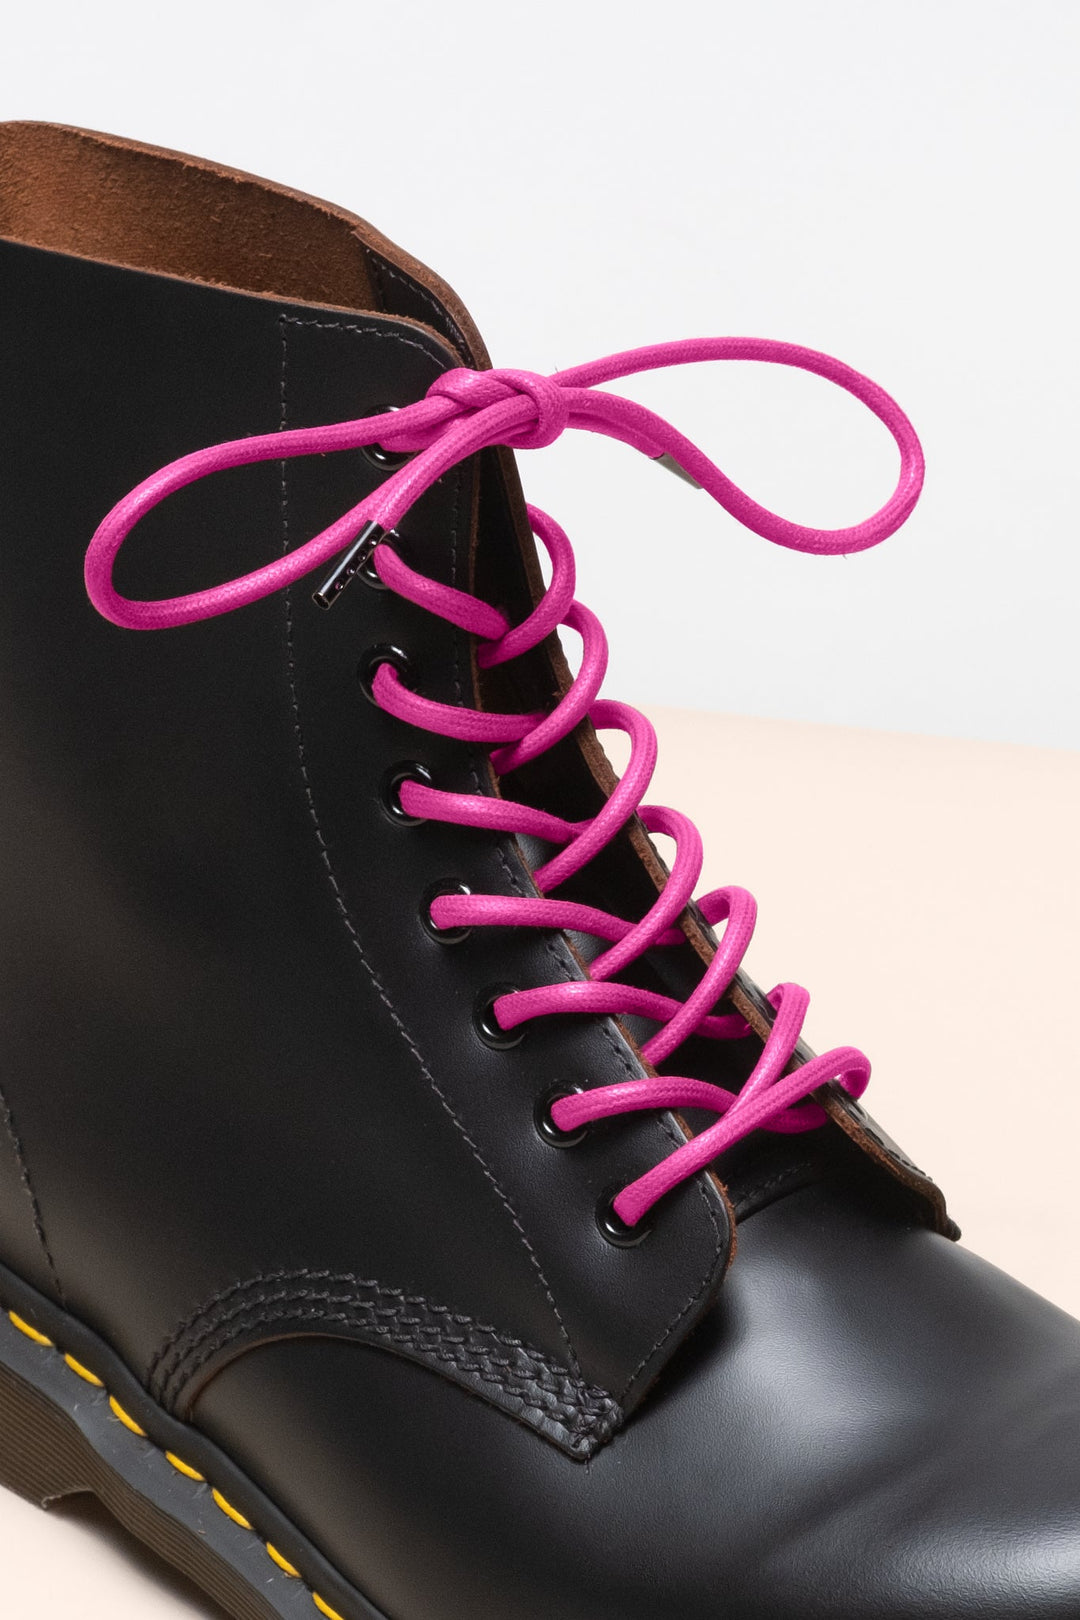 Hibiscus - 4mm round waxed shoelaces for boots and shoes made from 100% organic cotton - Senkels